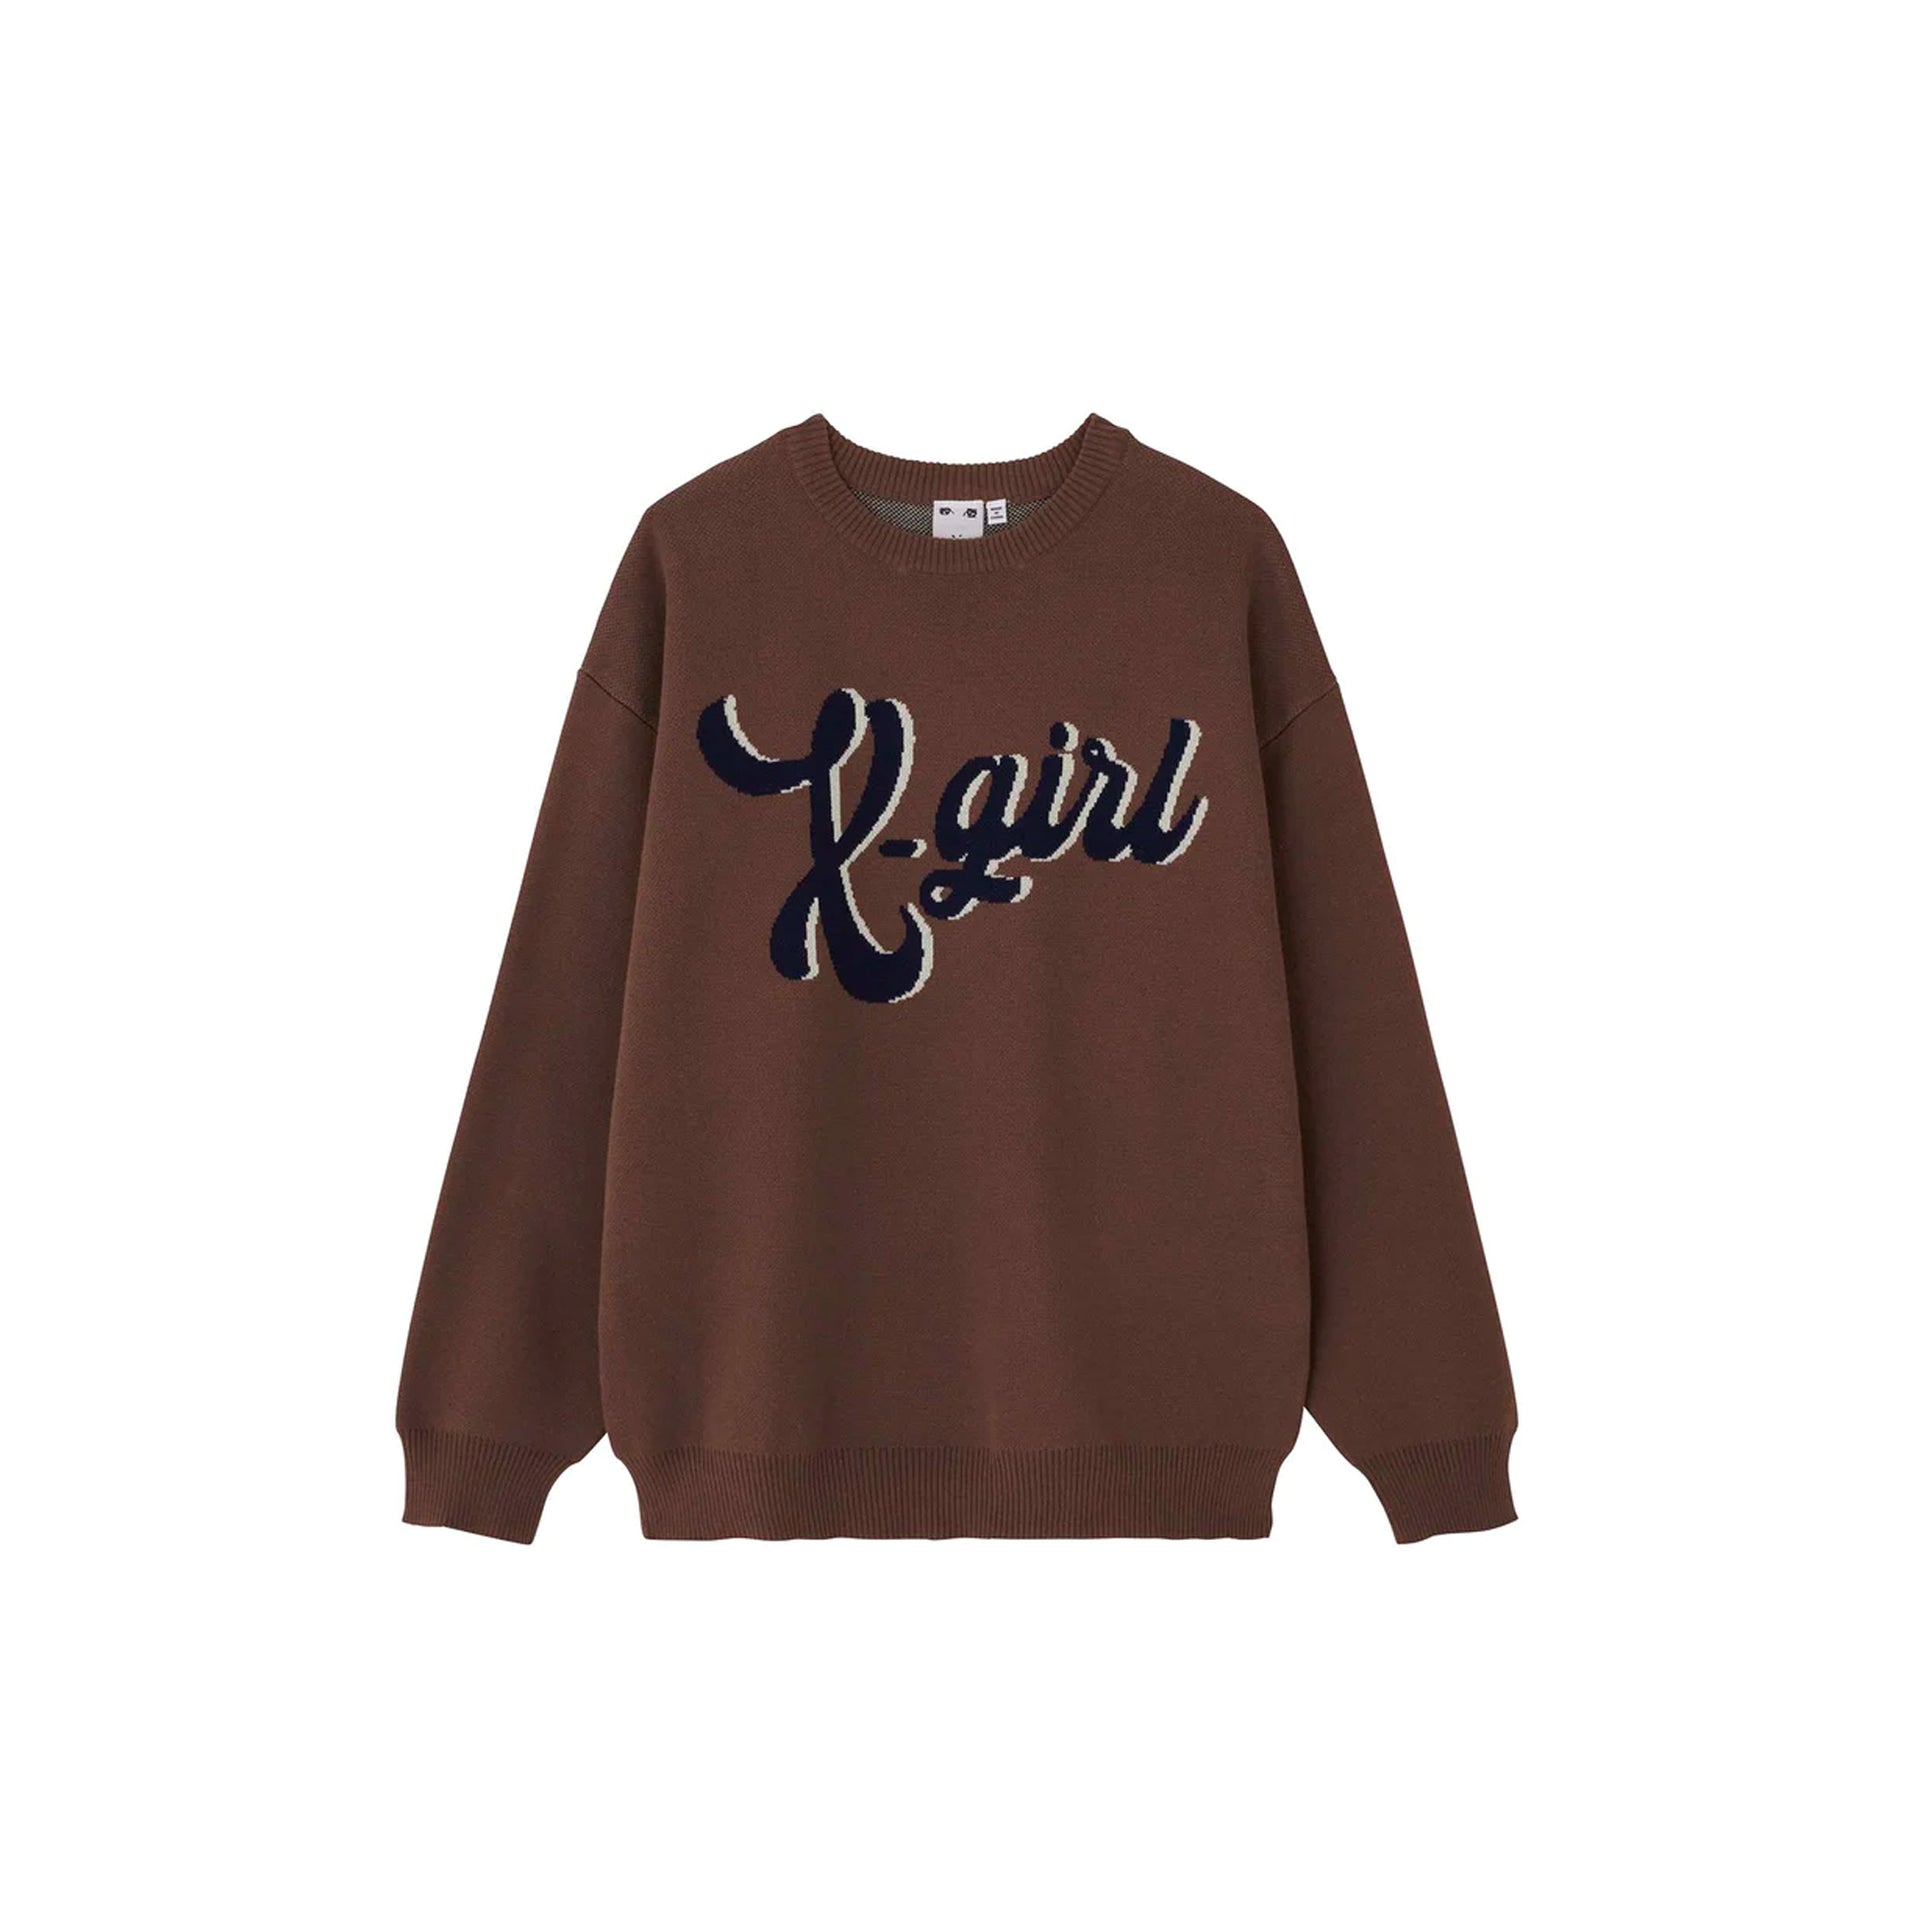 Monogram Jacquard Knit Top - Women - Highlights and Gifts